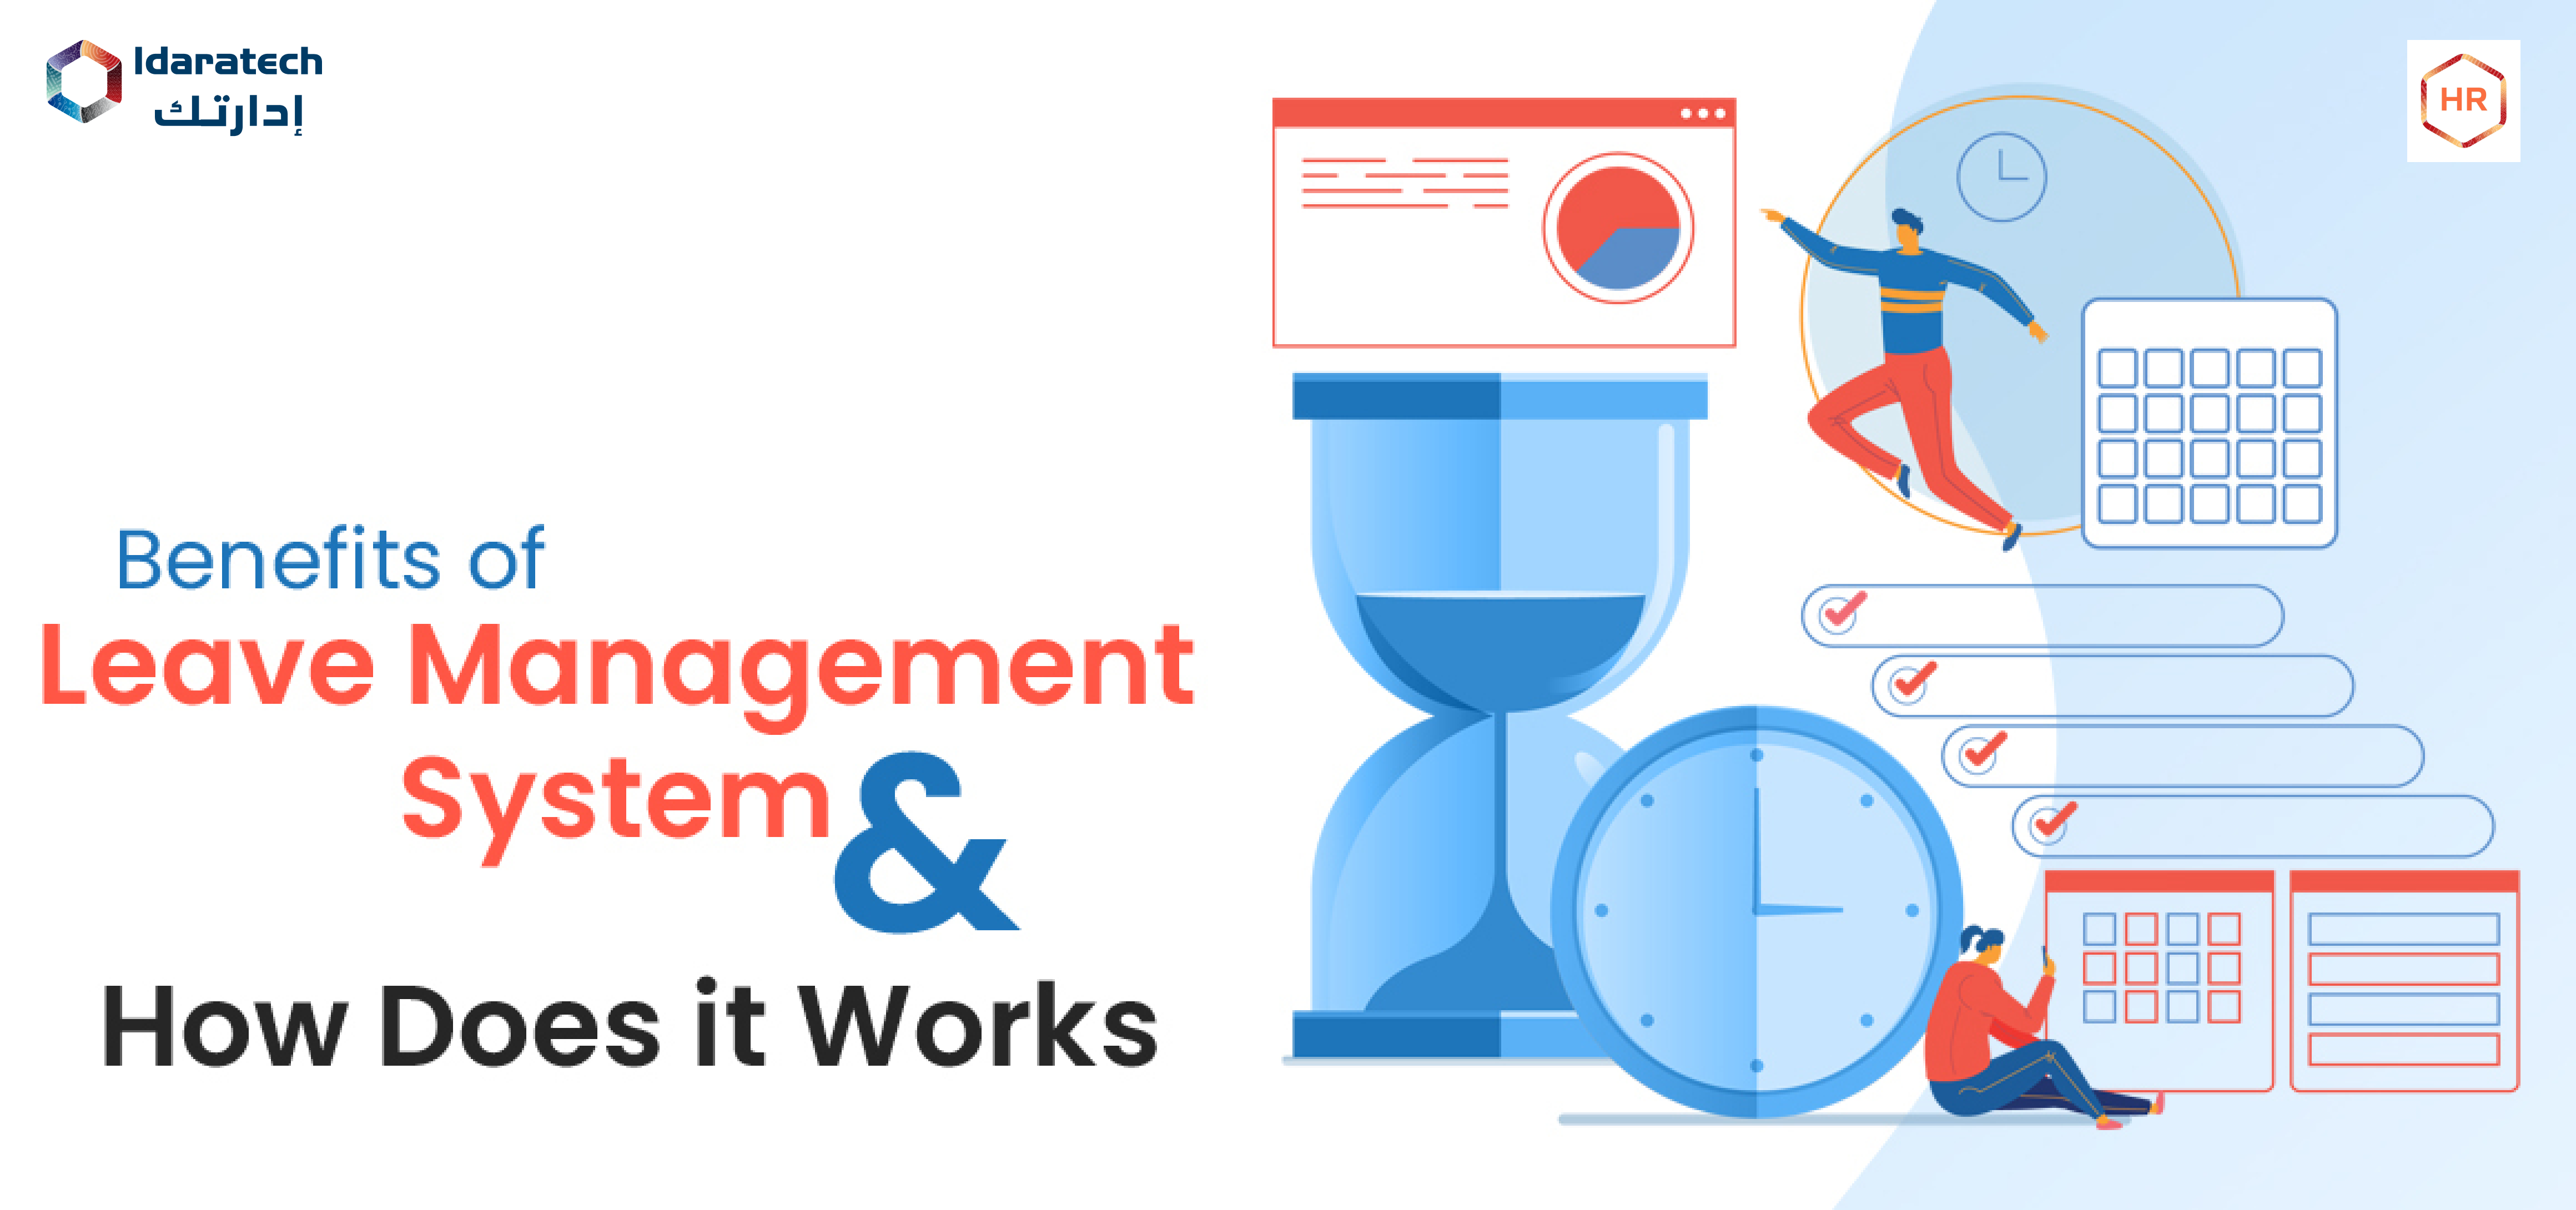 10 Best Benefits of Leave Management System and How Does it Works.